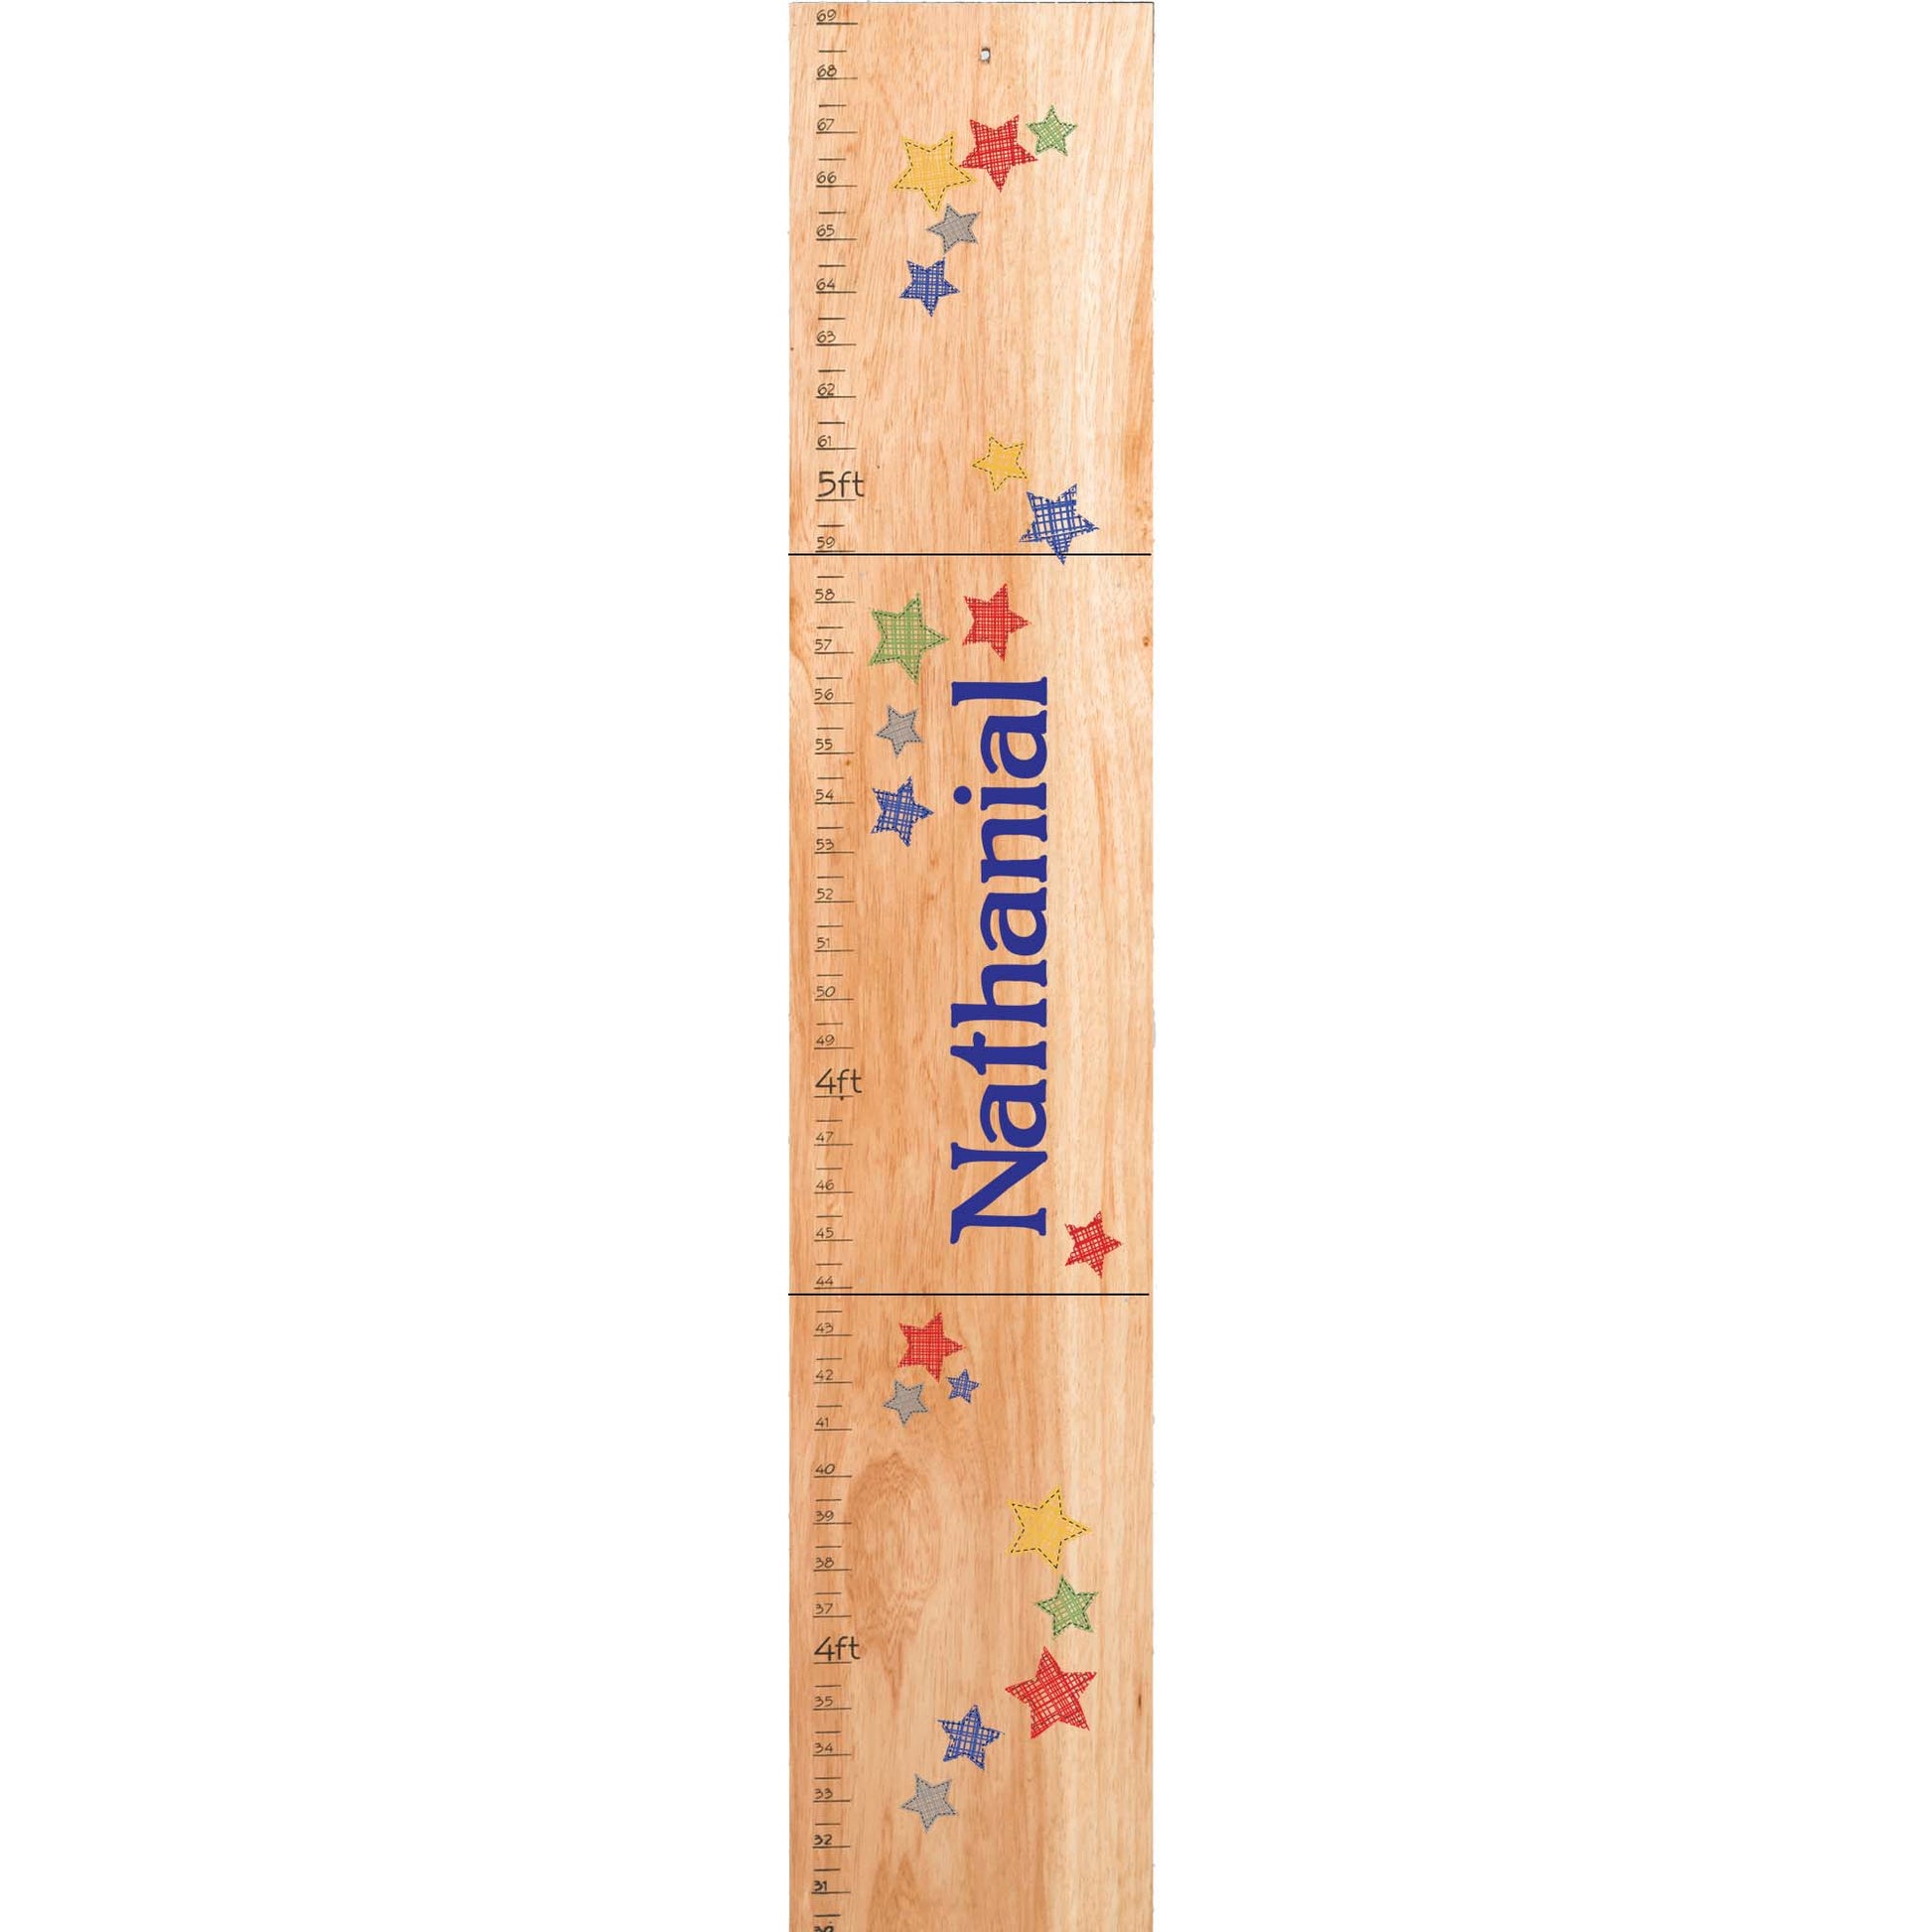 Personalized Natural Growth Chart With Race Cars Design